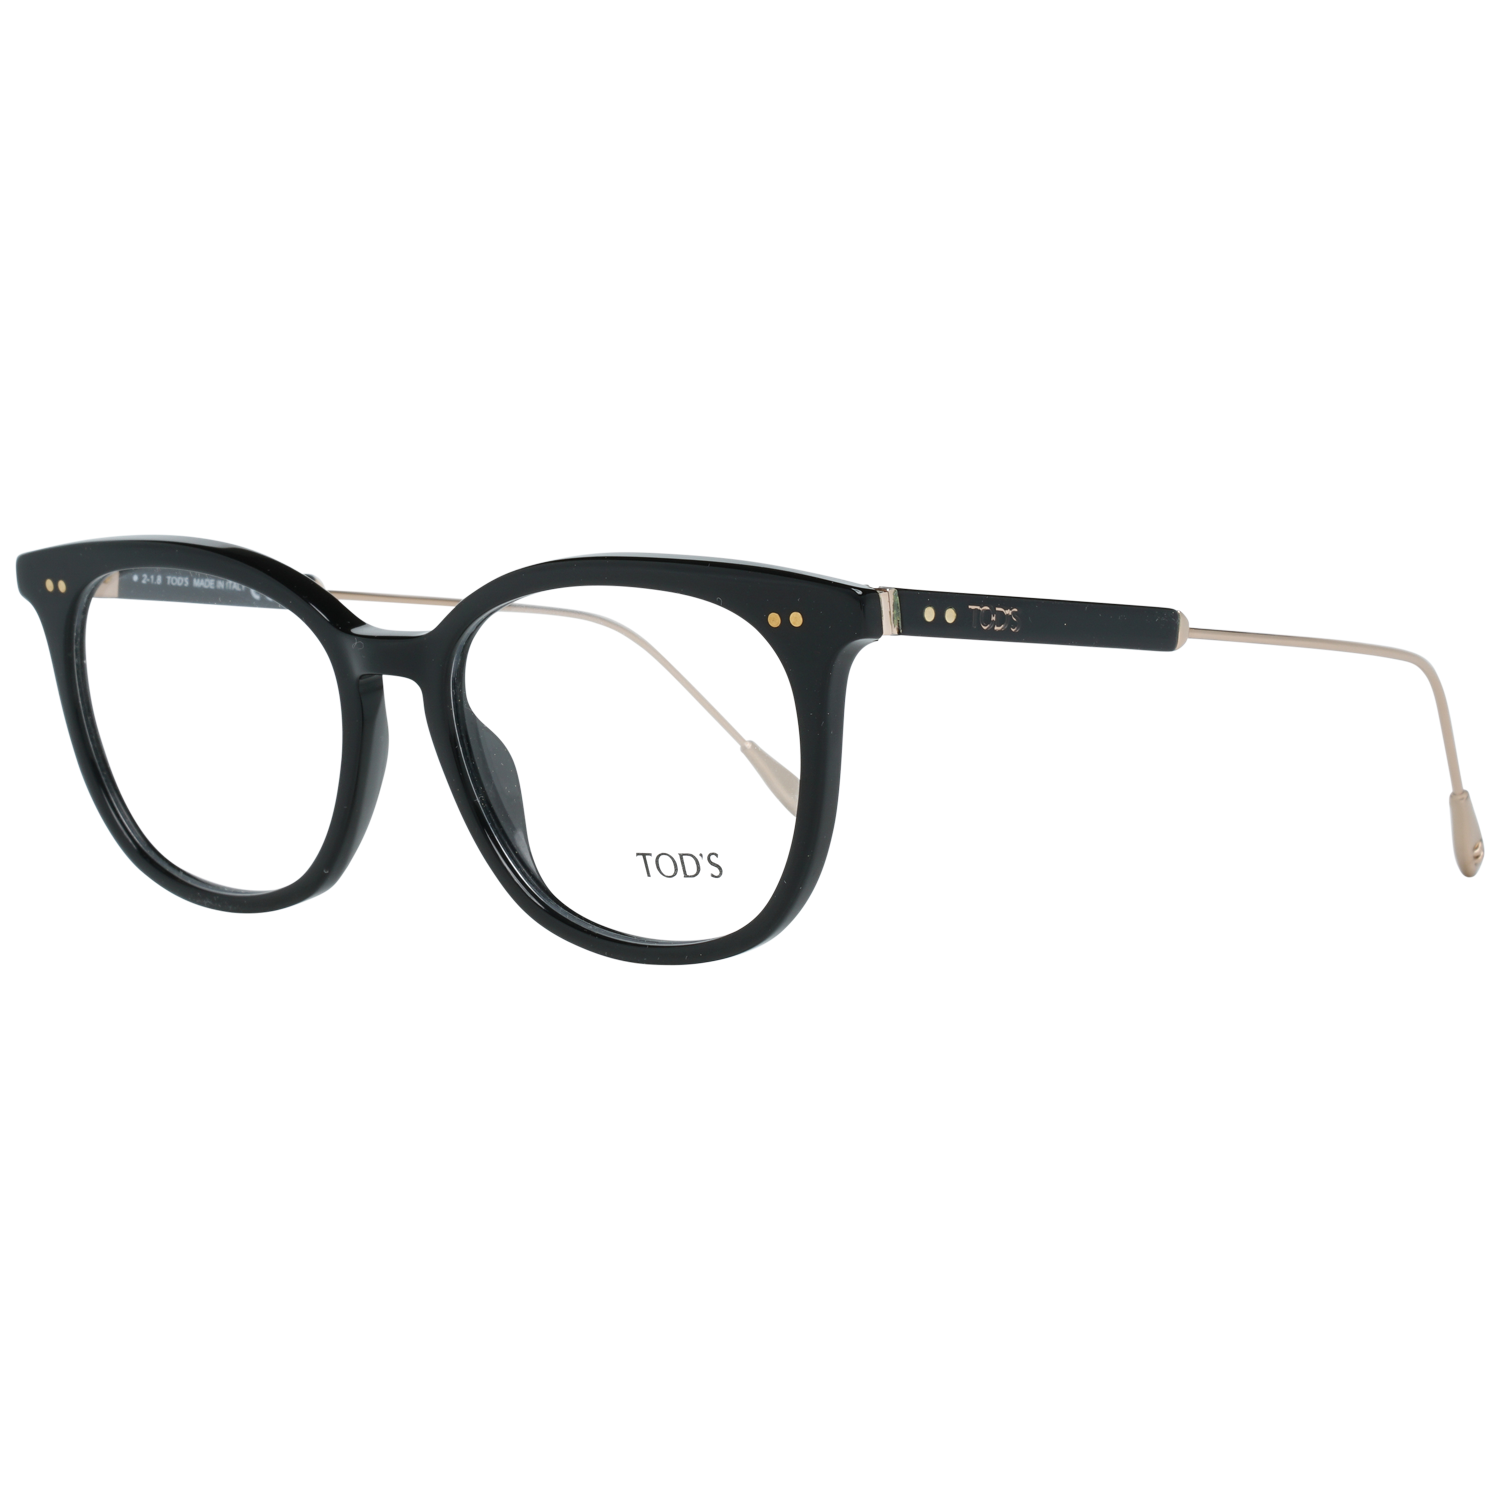 Tods Optical Frame TO5202 001 52 Women
Frame color: Black
Size: 52-16-145
Lenses width: 52
Lenses heigth: 46
Bridge length: 16
Frame width: 137
Temple length: 145
Shipment includes: Case, Cleaning cloth
Style: Full-Rim
Spring hinge: No